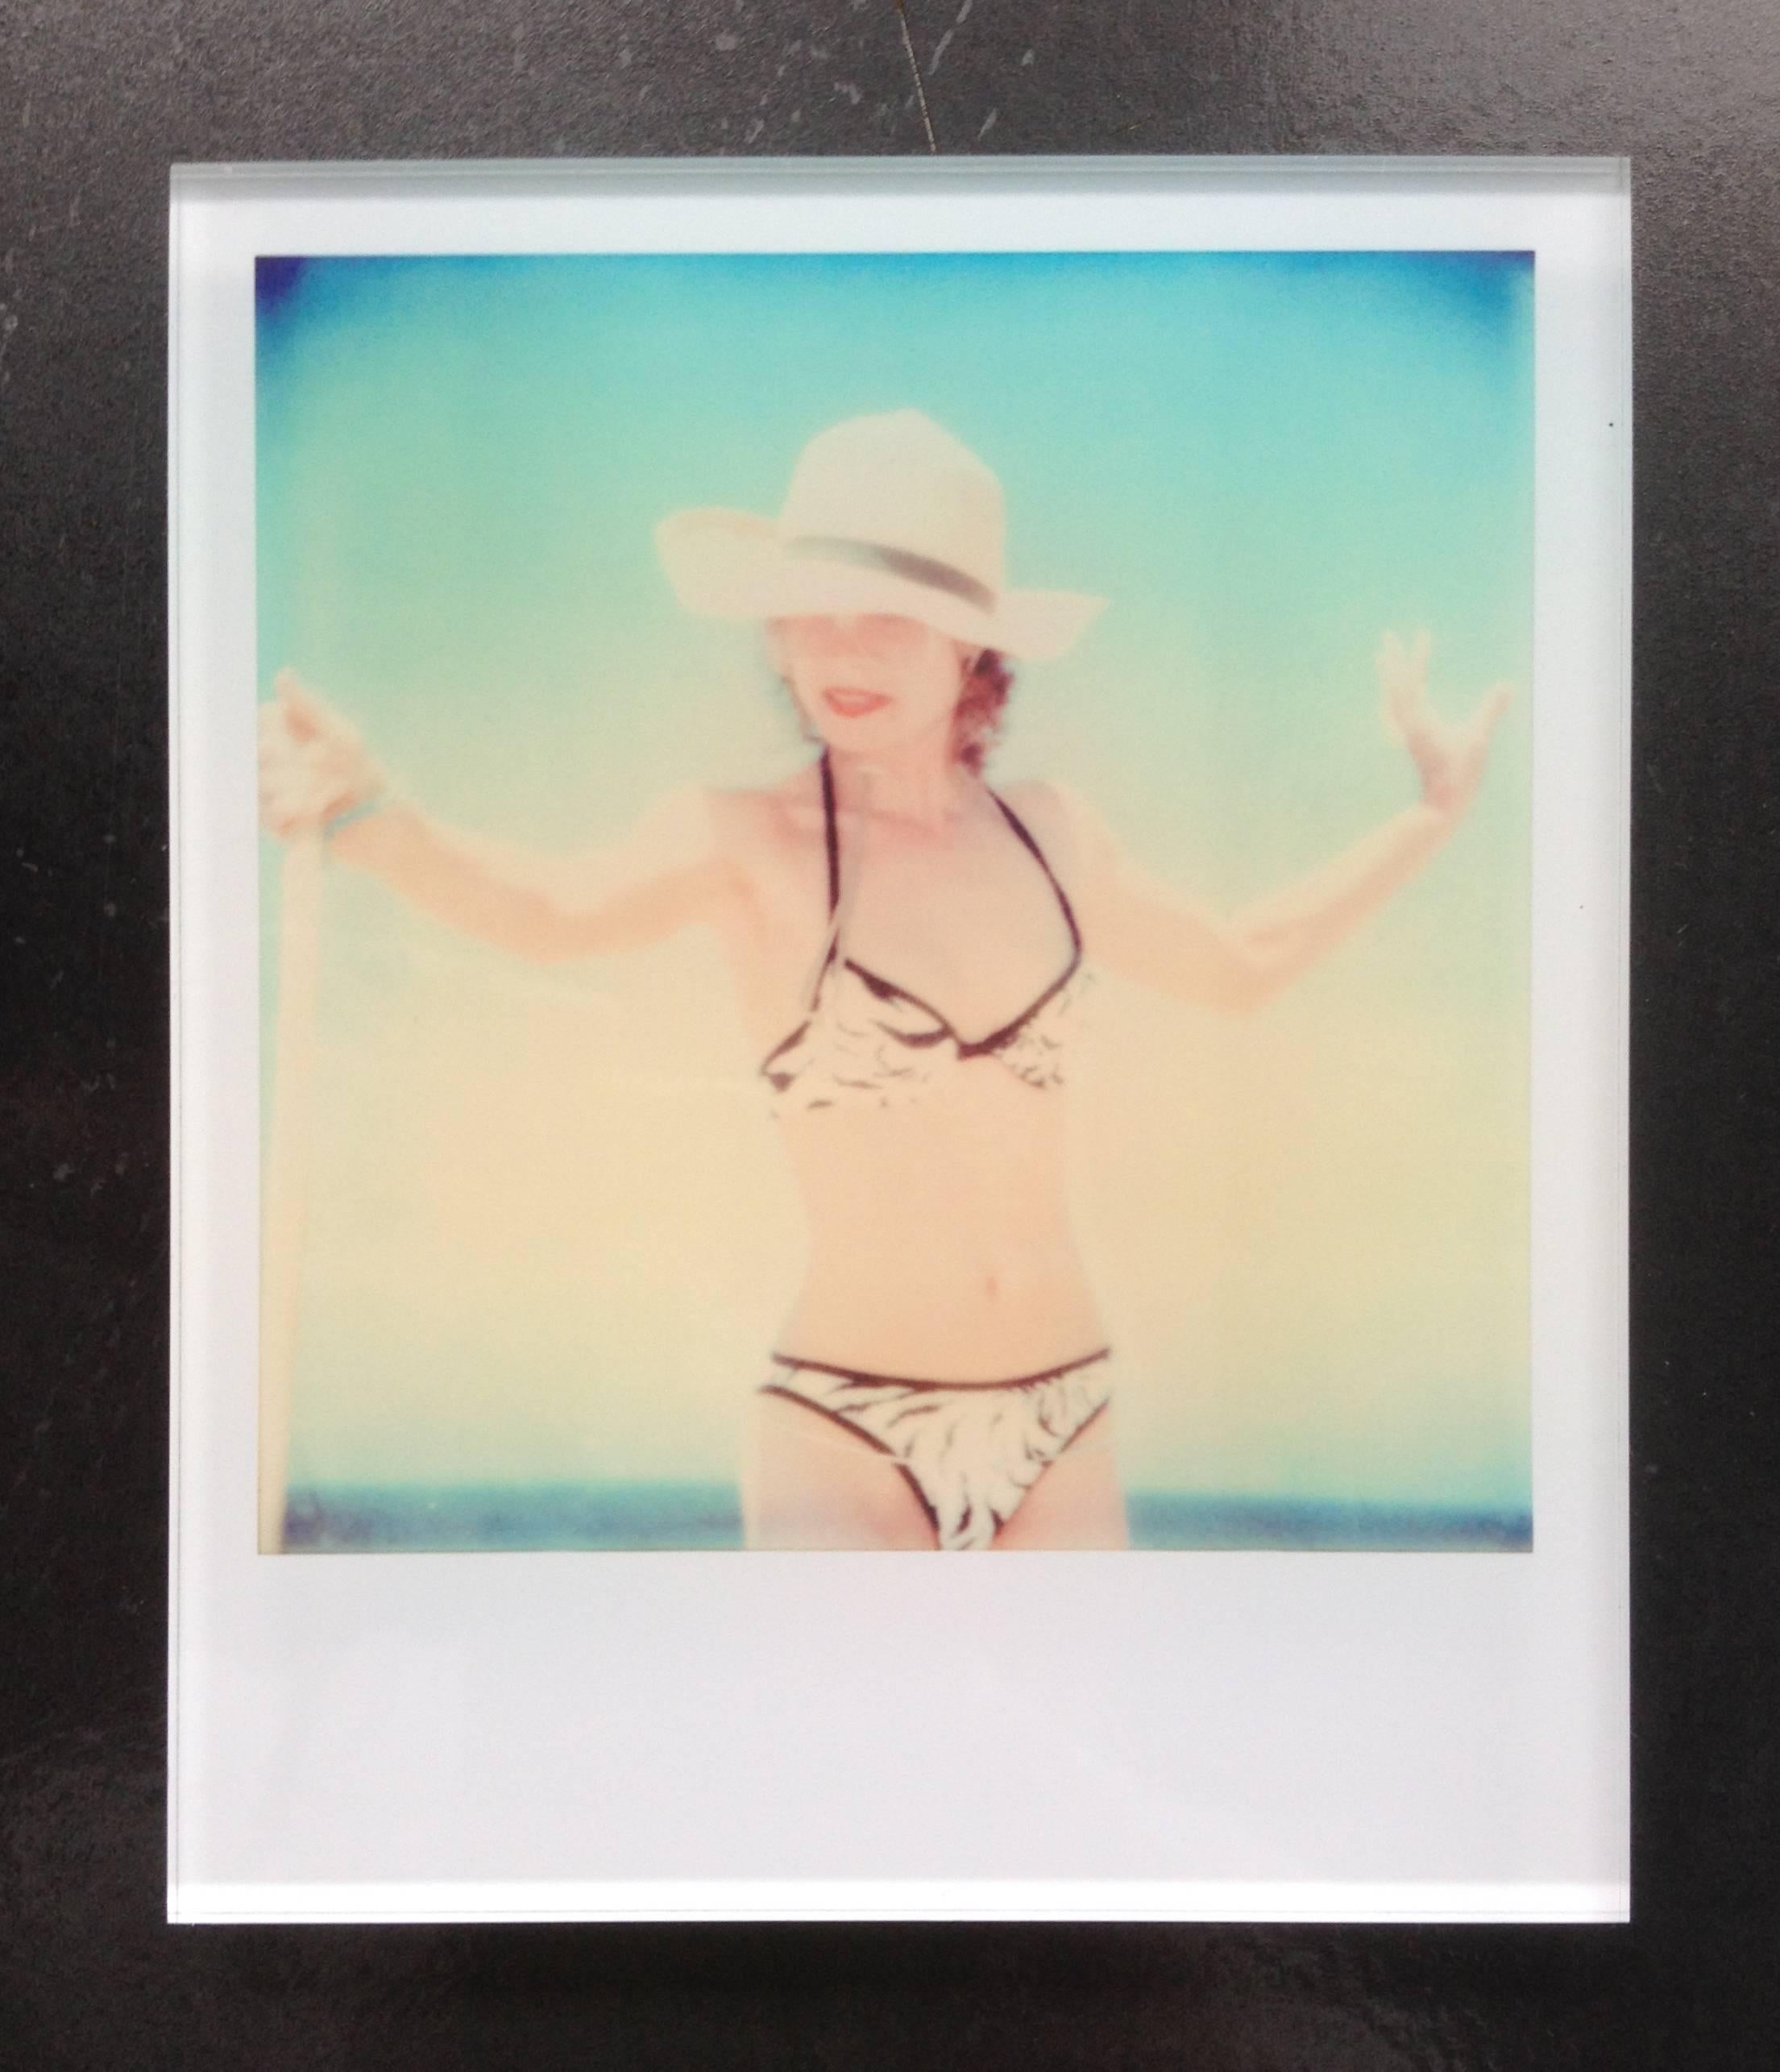 Stefanie Schneider's Minis
'Untitled #4' (Beachshoot) featuring Radha Mitchell, 2005
signed and signature brand on verso
Lambda digital Color Photographs based on a Polaroid

Polaroid sized open Editions 1999-2013
10.7 x 8.8cm (Image